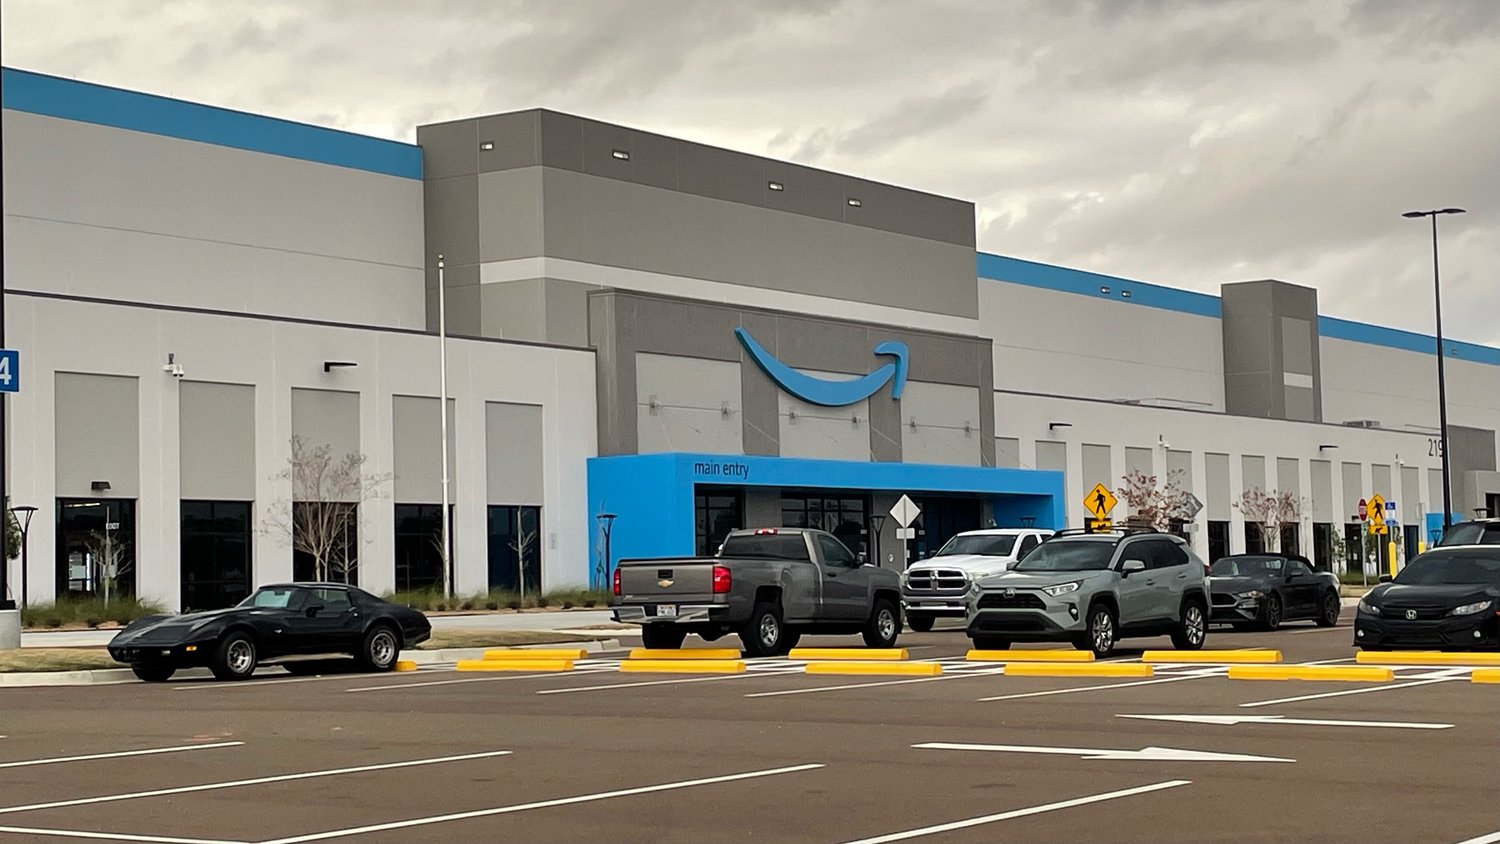 The Amazon fulfillment center is expected to open sometime in February 2022.